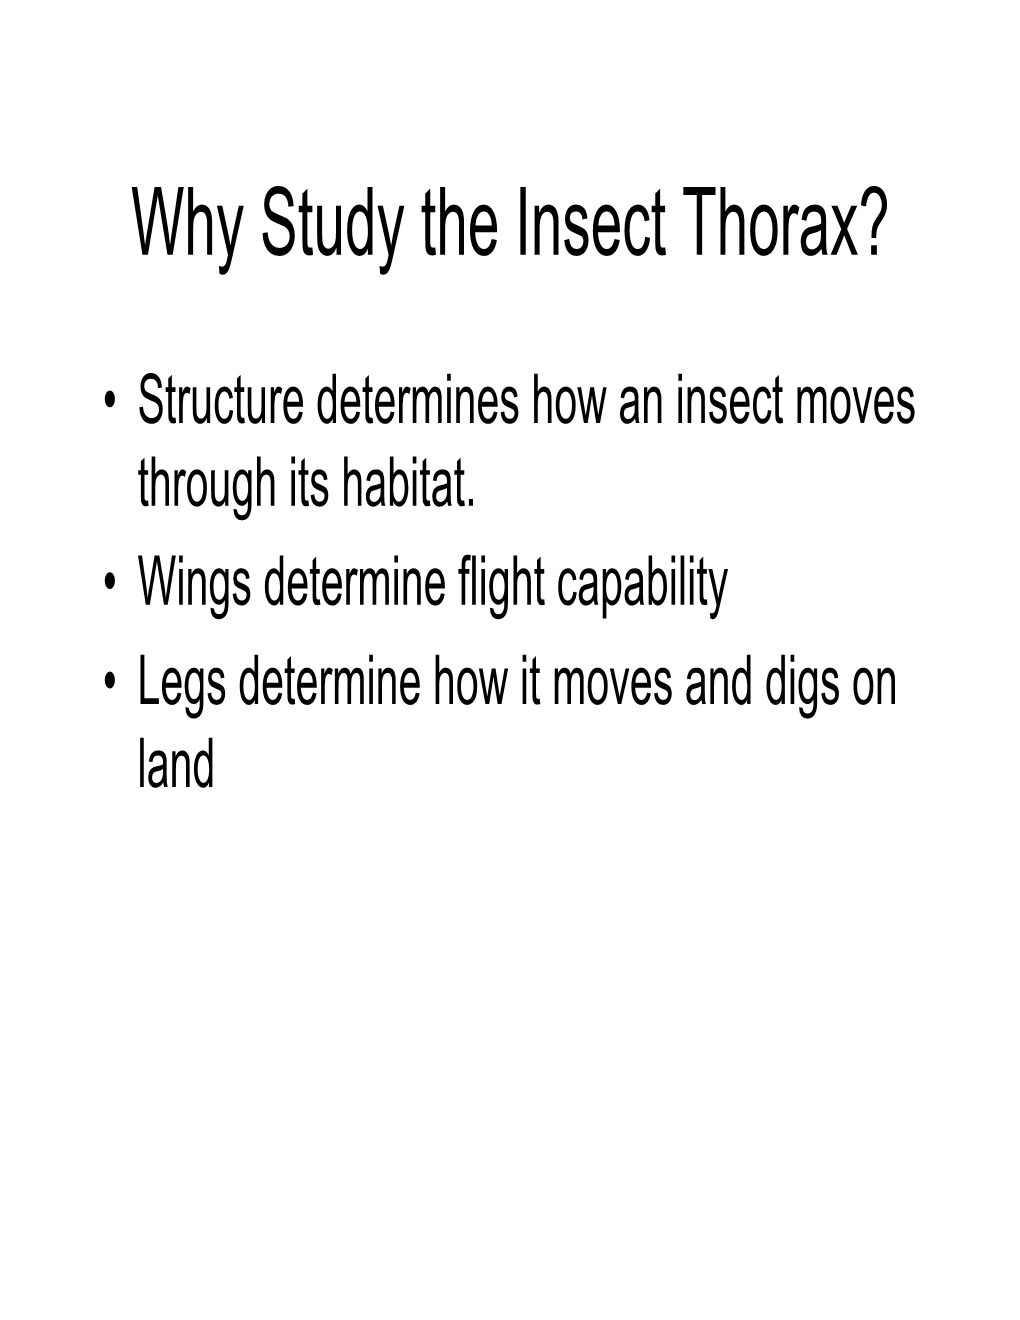 Insect Thorax and Abdomen